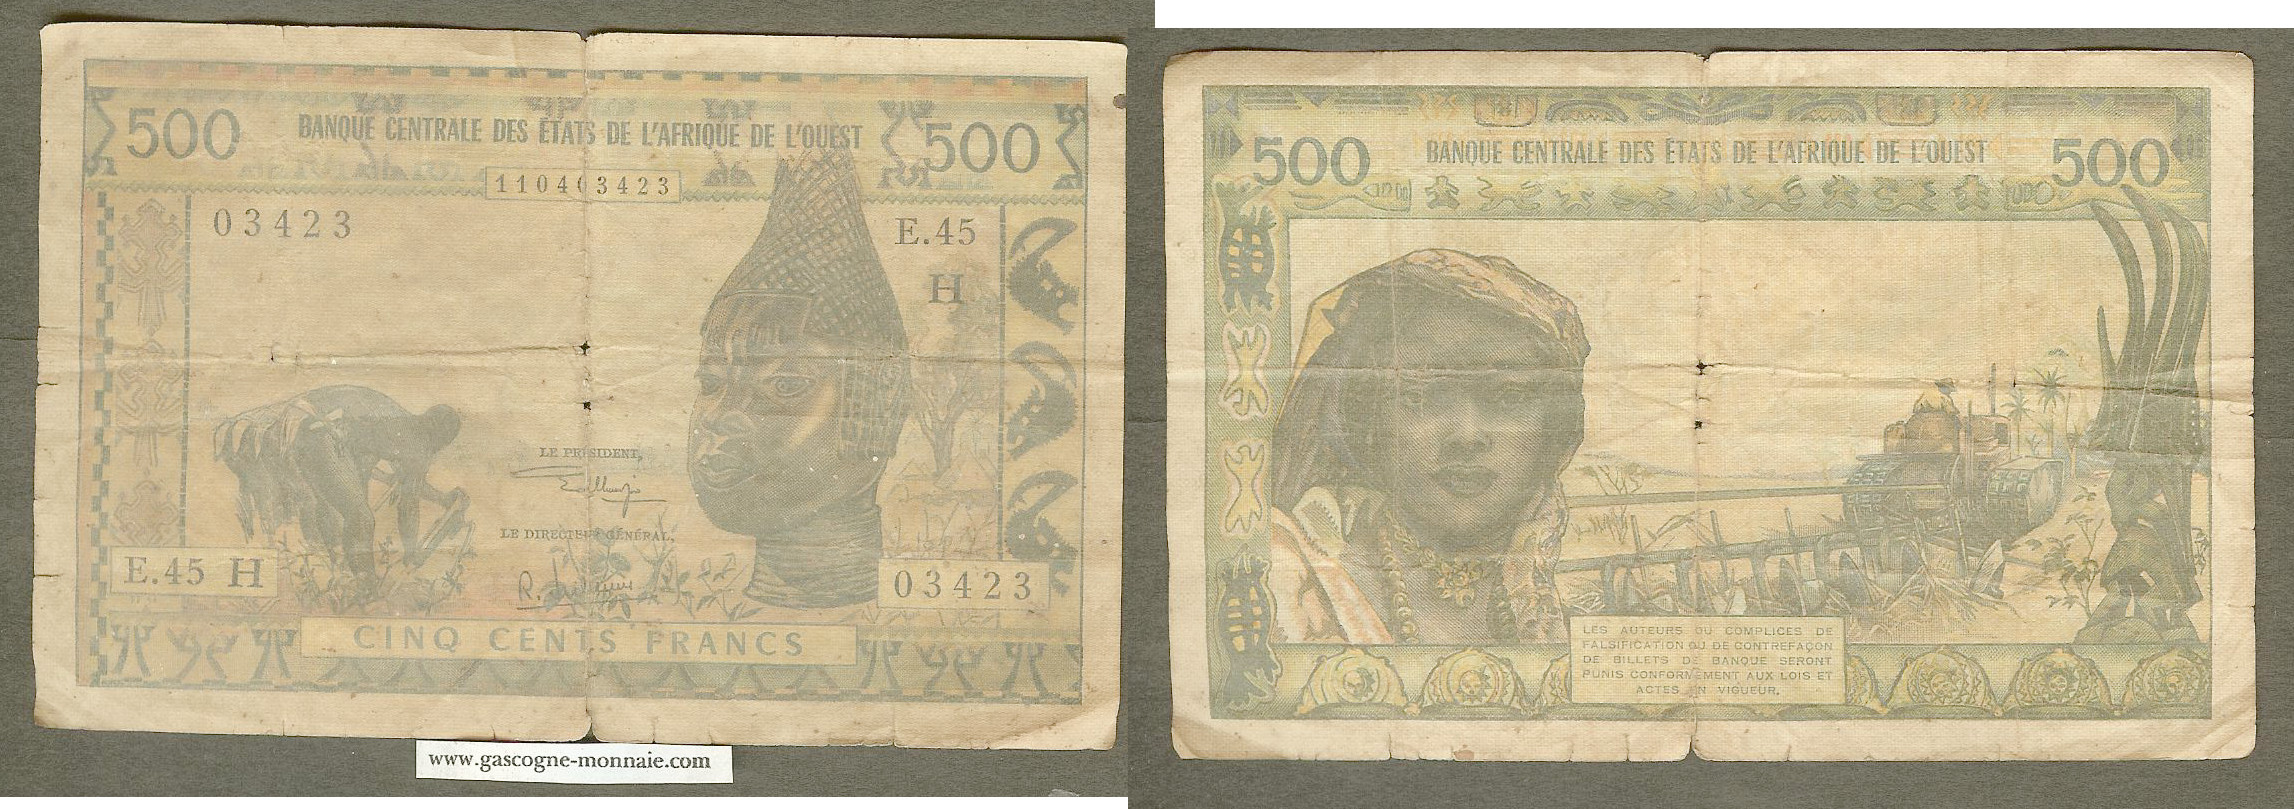 West African States 500 francs 1959-62 F